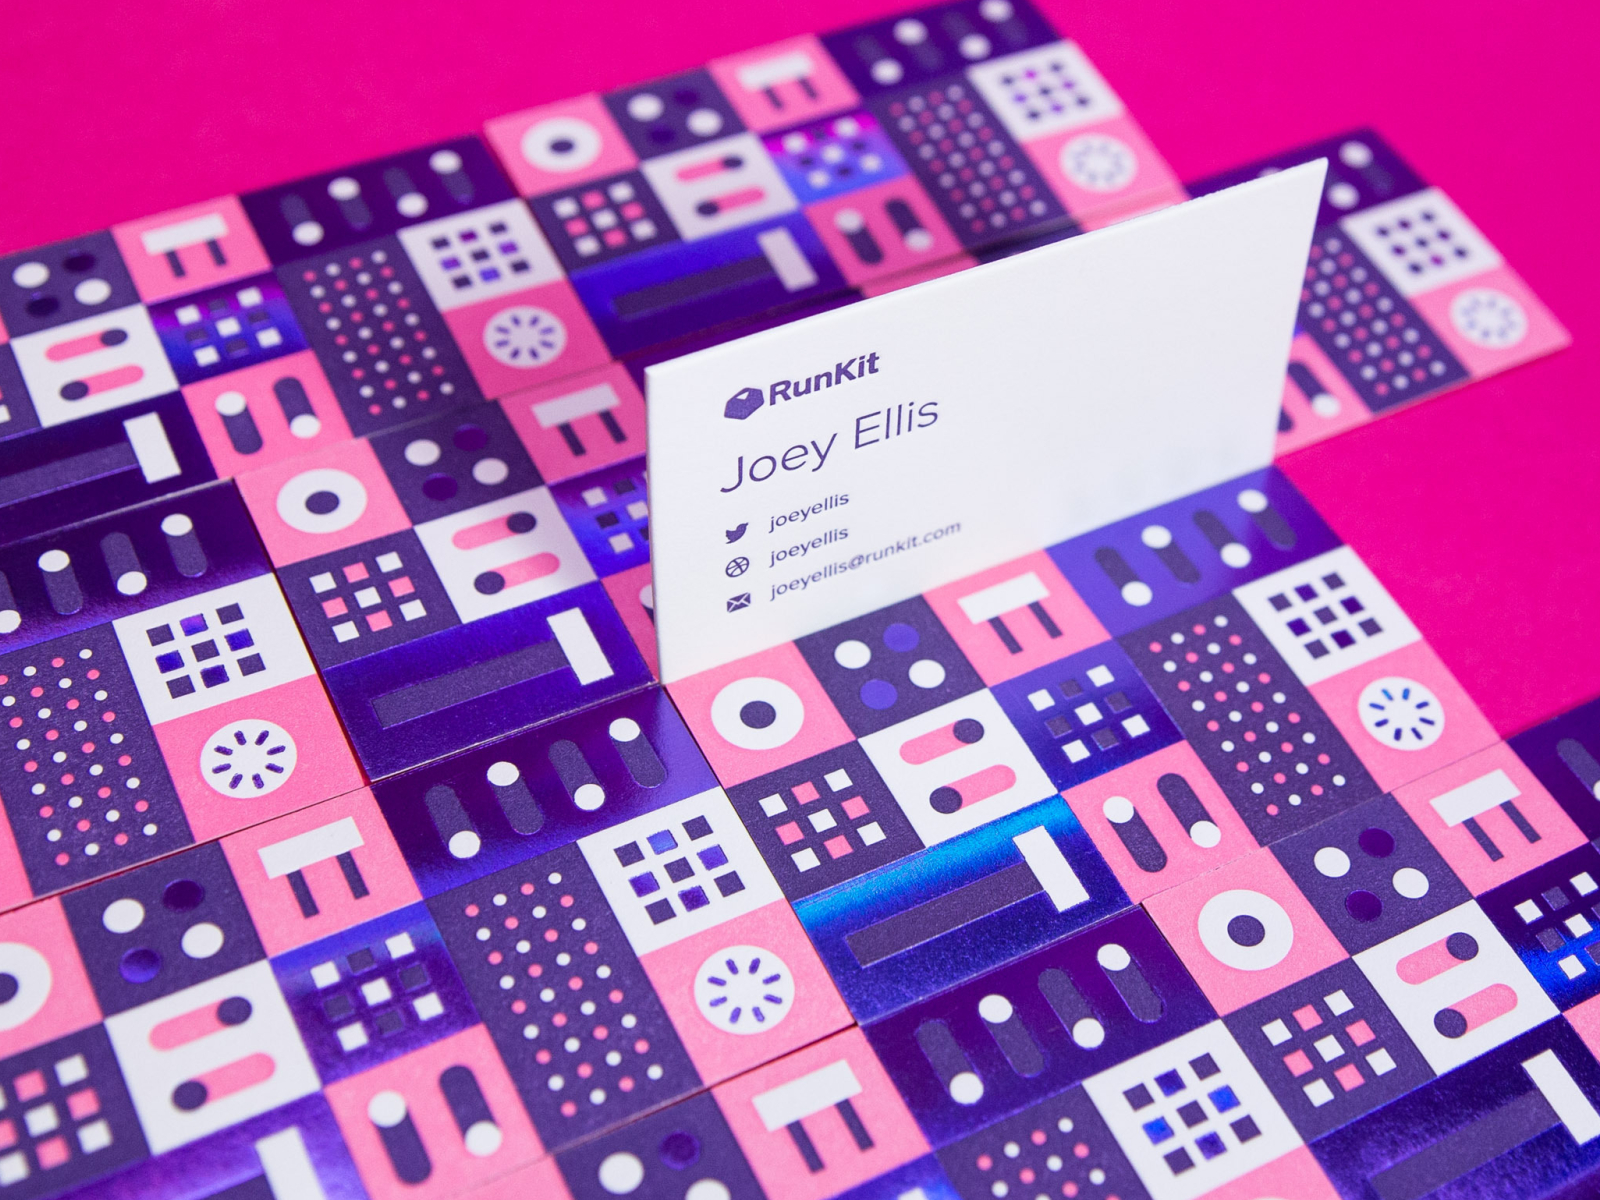 Business card by Ryan Prudhomme